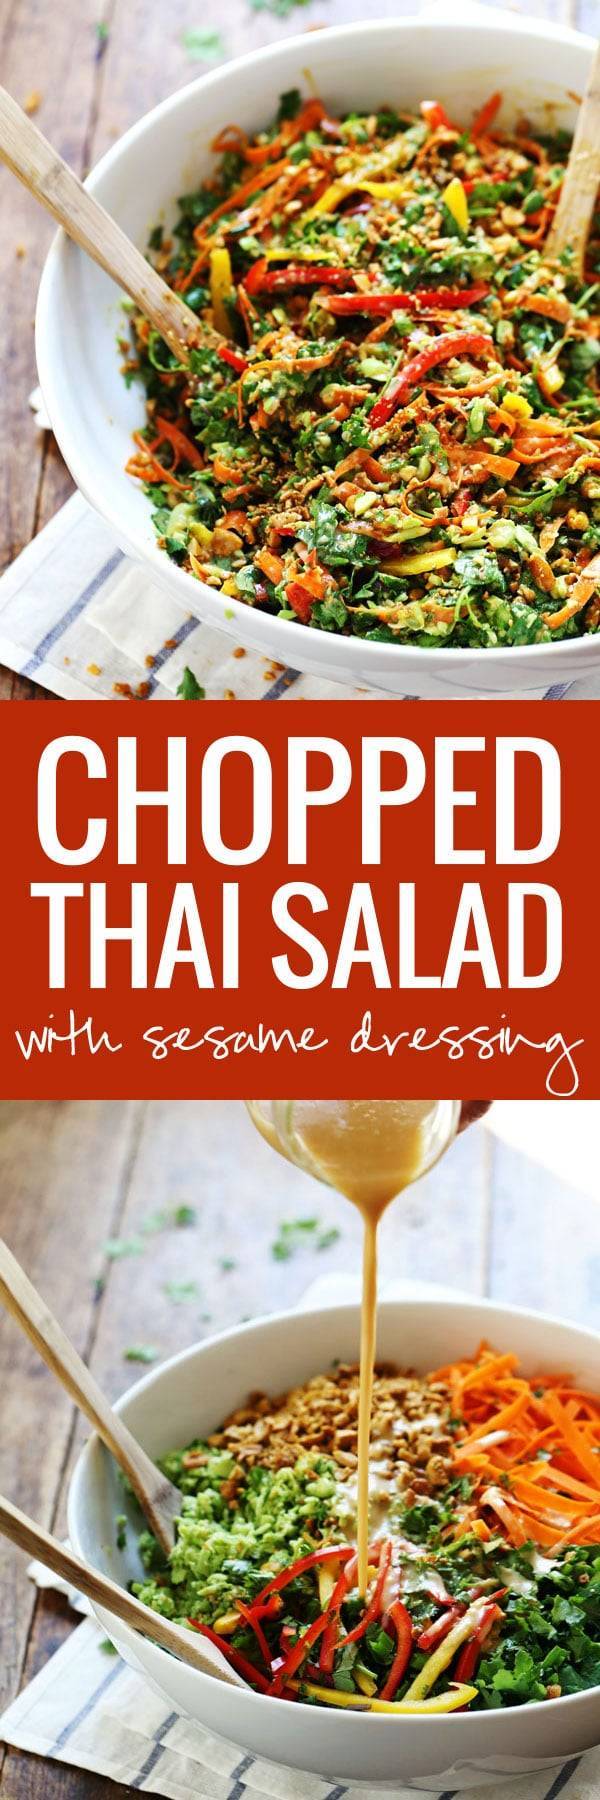 Chopped Thai Salad with Sesame Garlic Dressing - a rainbow of power veggies including edamame, bell peppers, kale, spicy cashews, and cilantro tossed with a flavorful made-from-scratch Thai dressing. 390 calories.